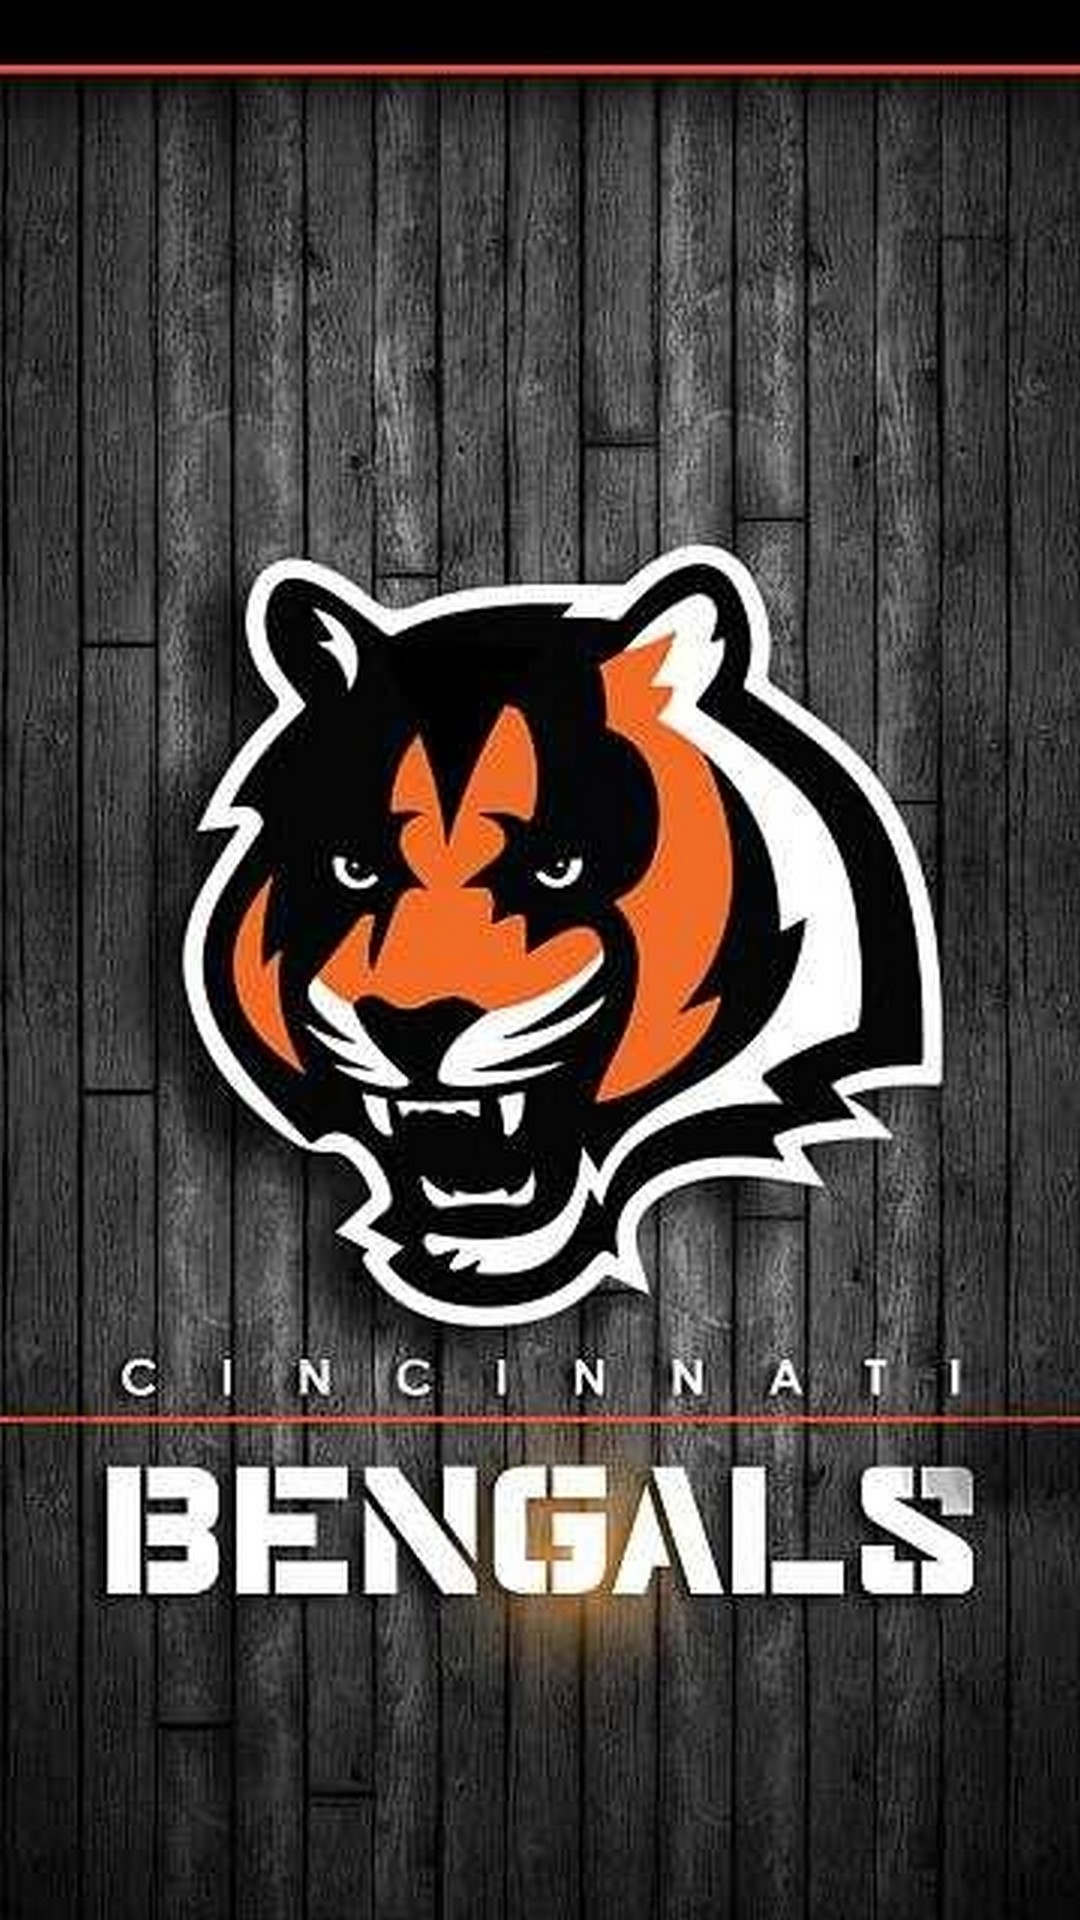 Cincinnati Bengals iPhone Wallpaper HD With high-resolution 1080X1920 pixel. Download and set as wallpaper for Apple iPhone X, XS Max, XR, 8, 7, 6, SE, iPad, Android